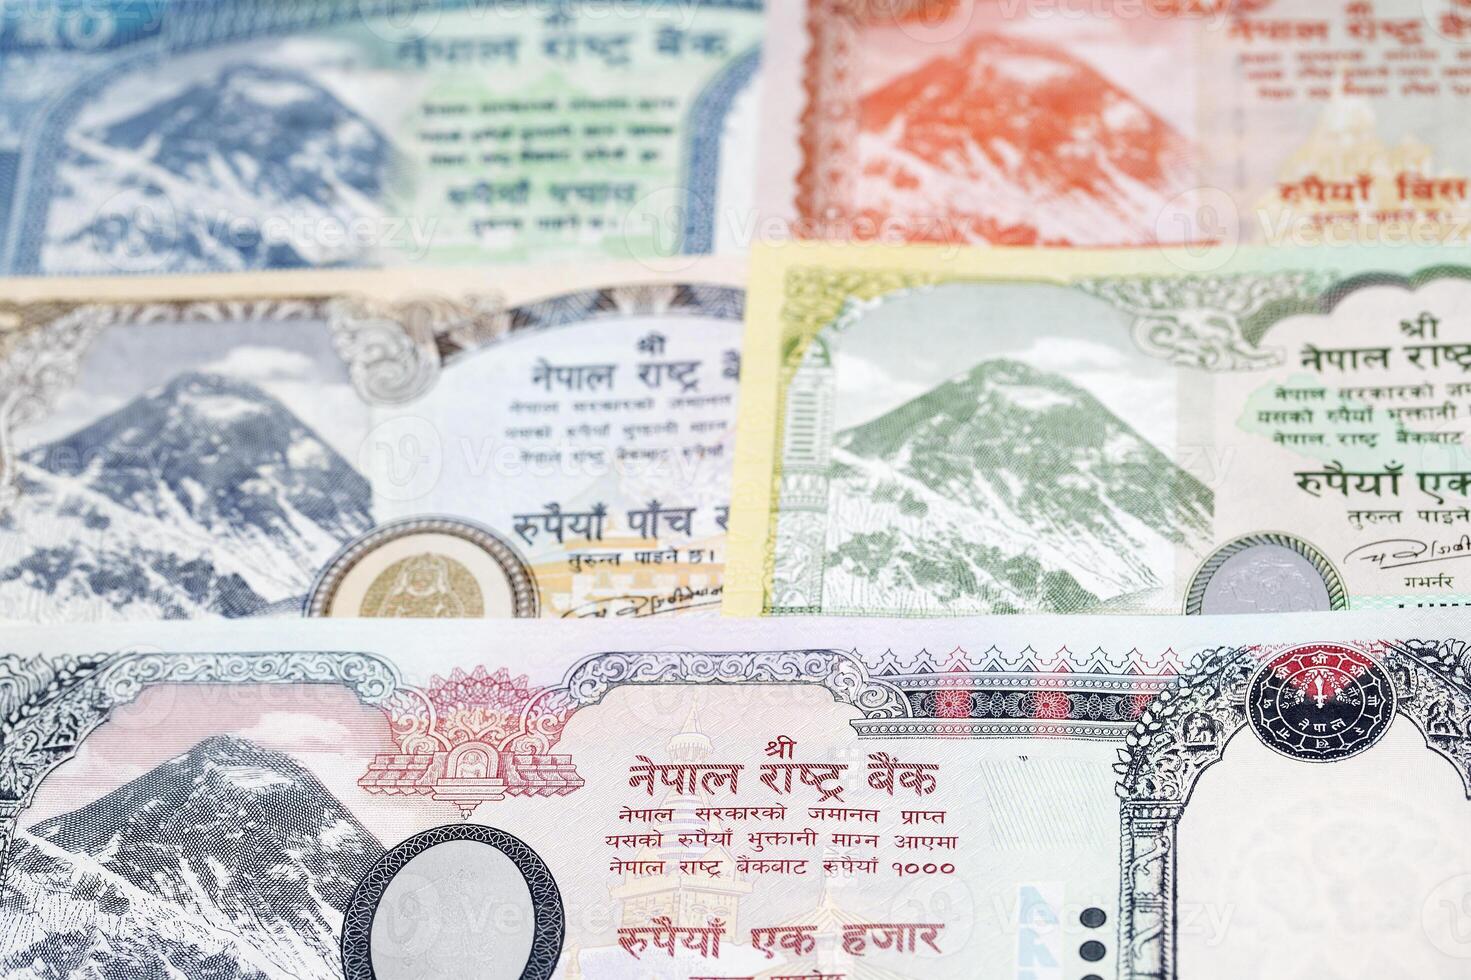 Nepalese rupee a business background photo